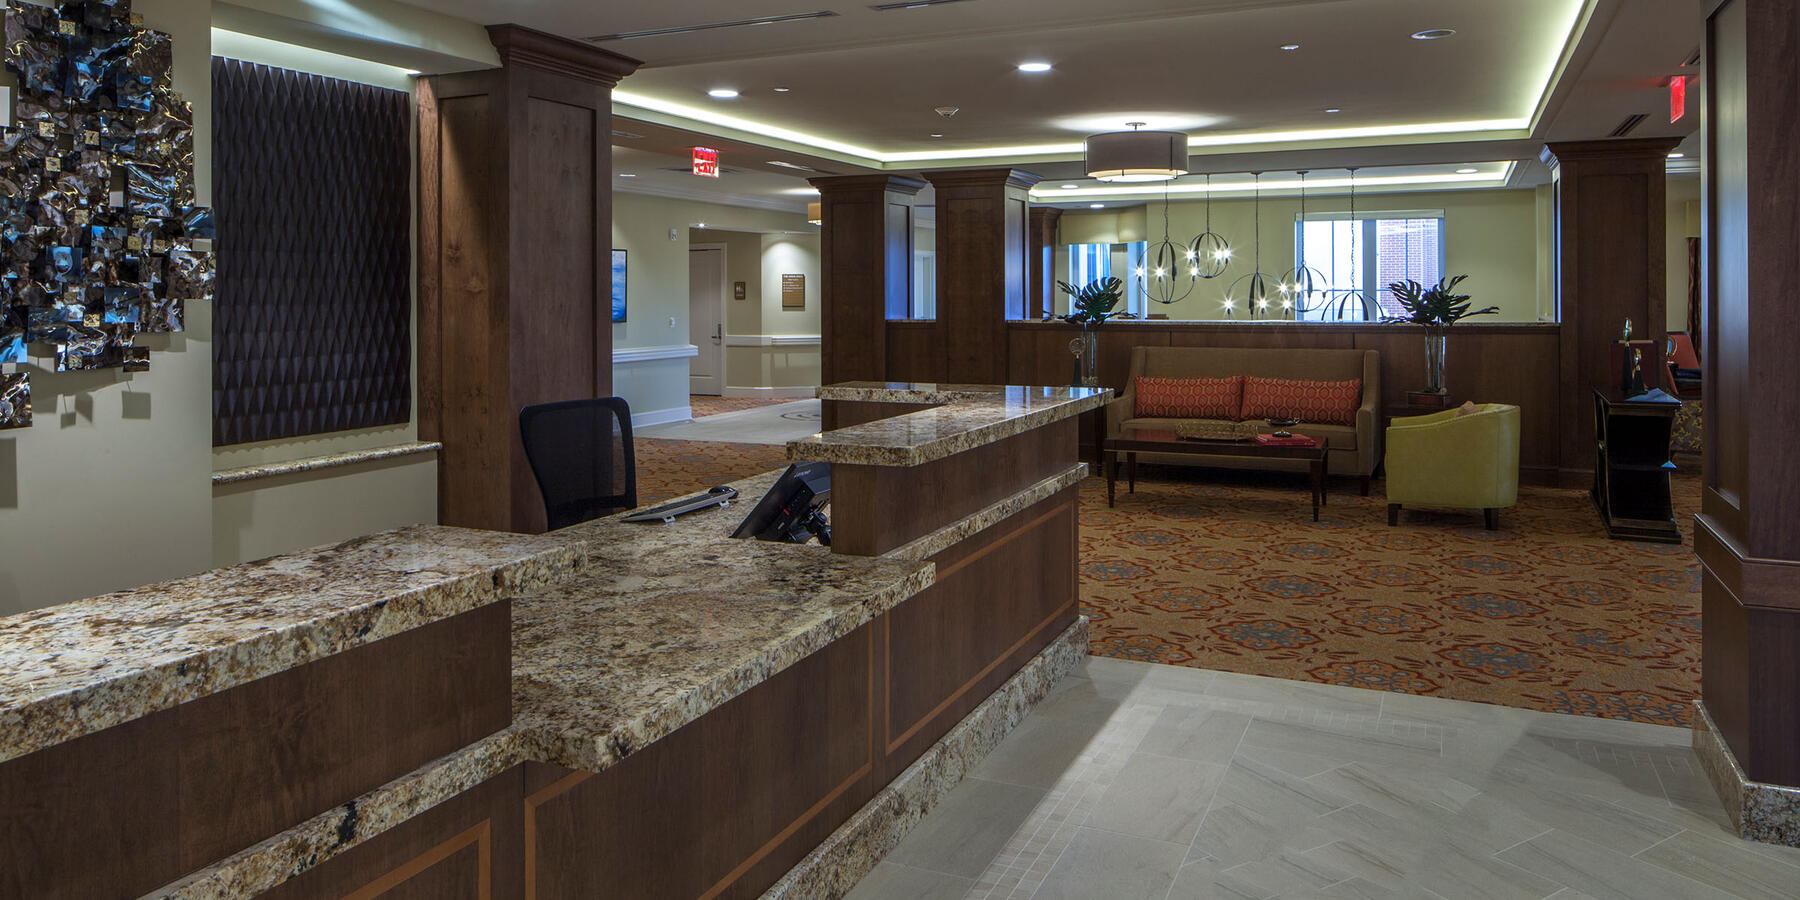 Chicago Senior Living Construction - Moorings Arlington Heights dining and reception area